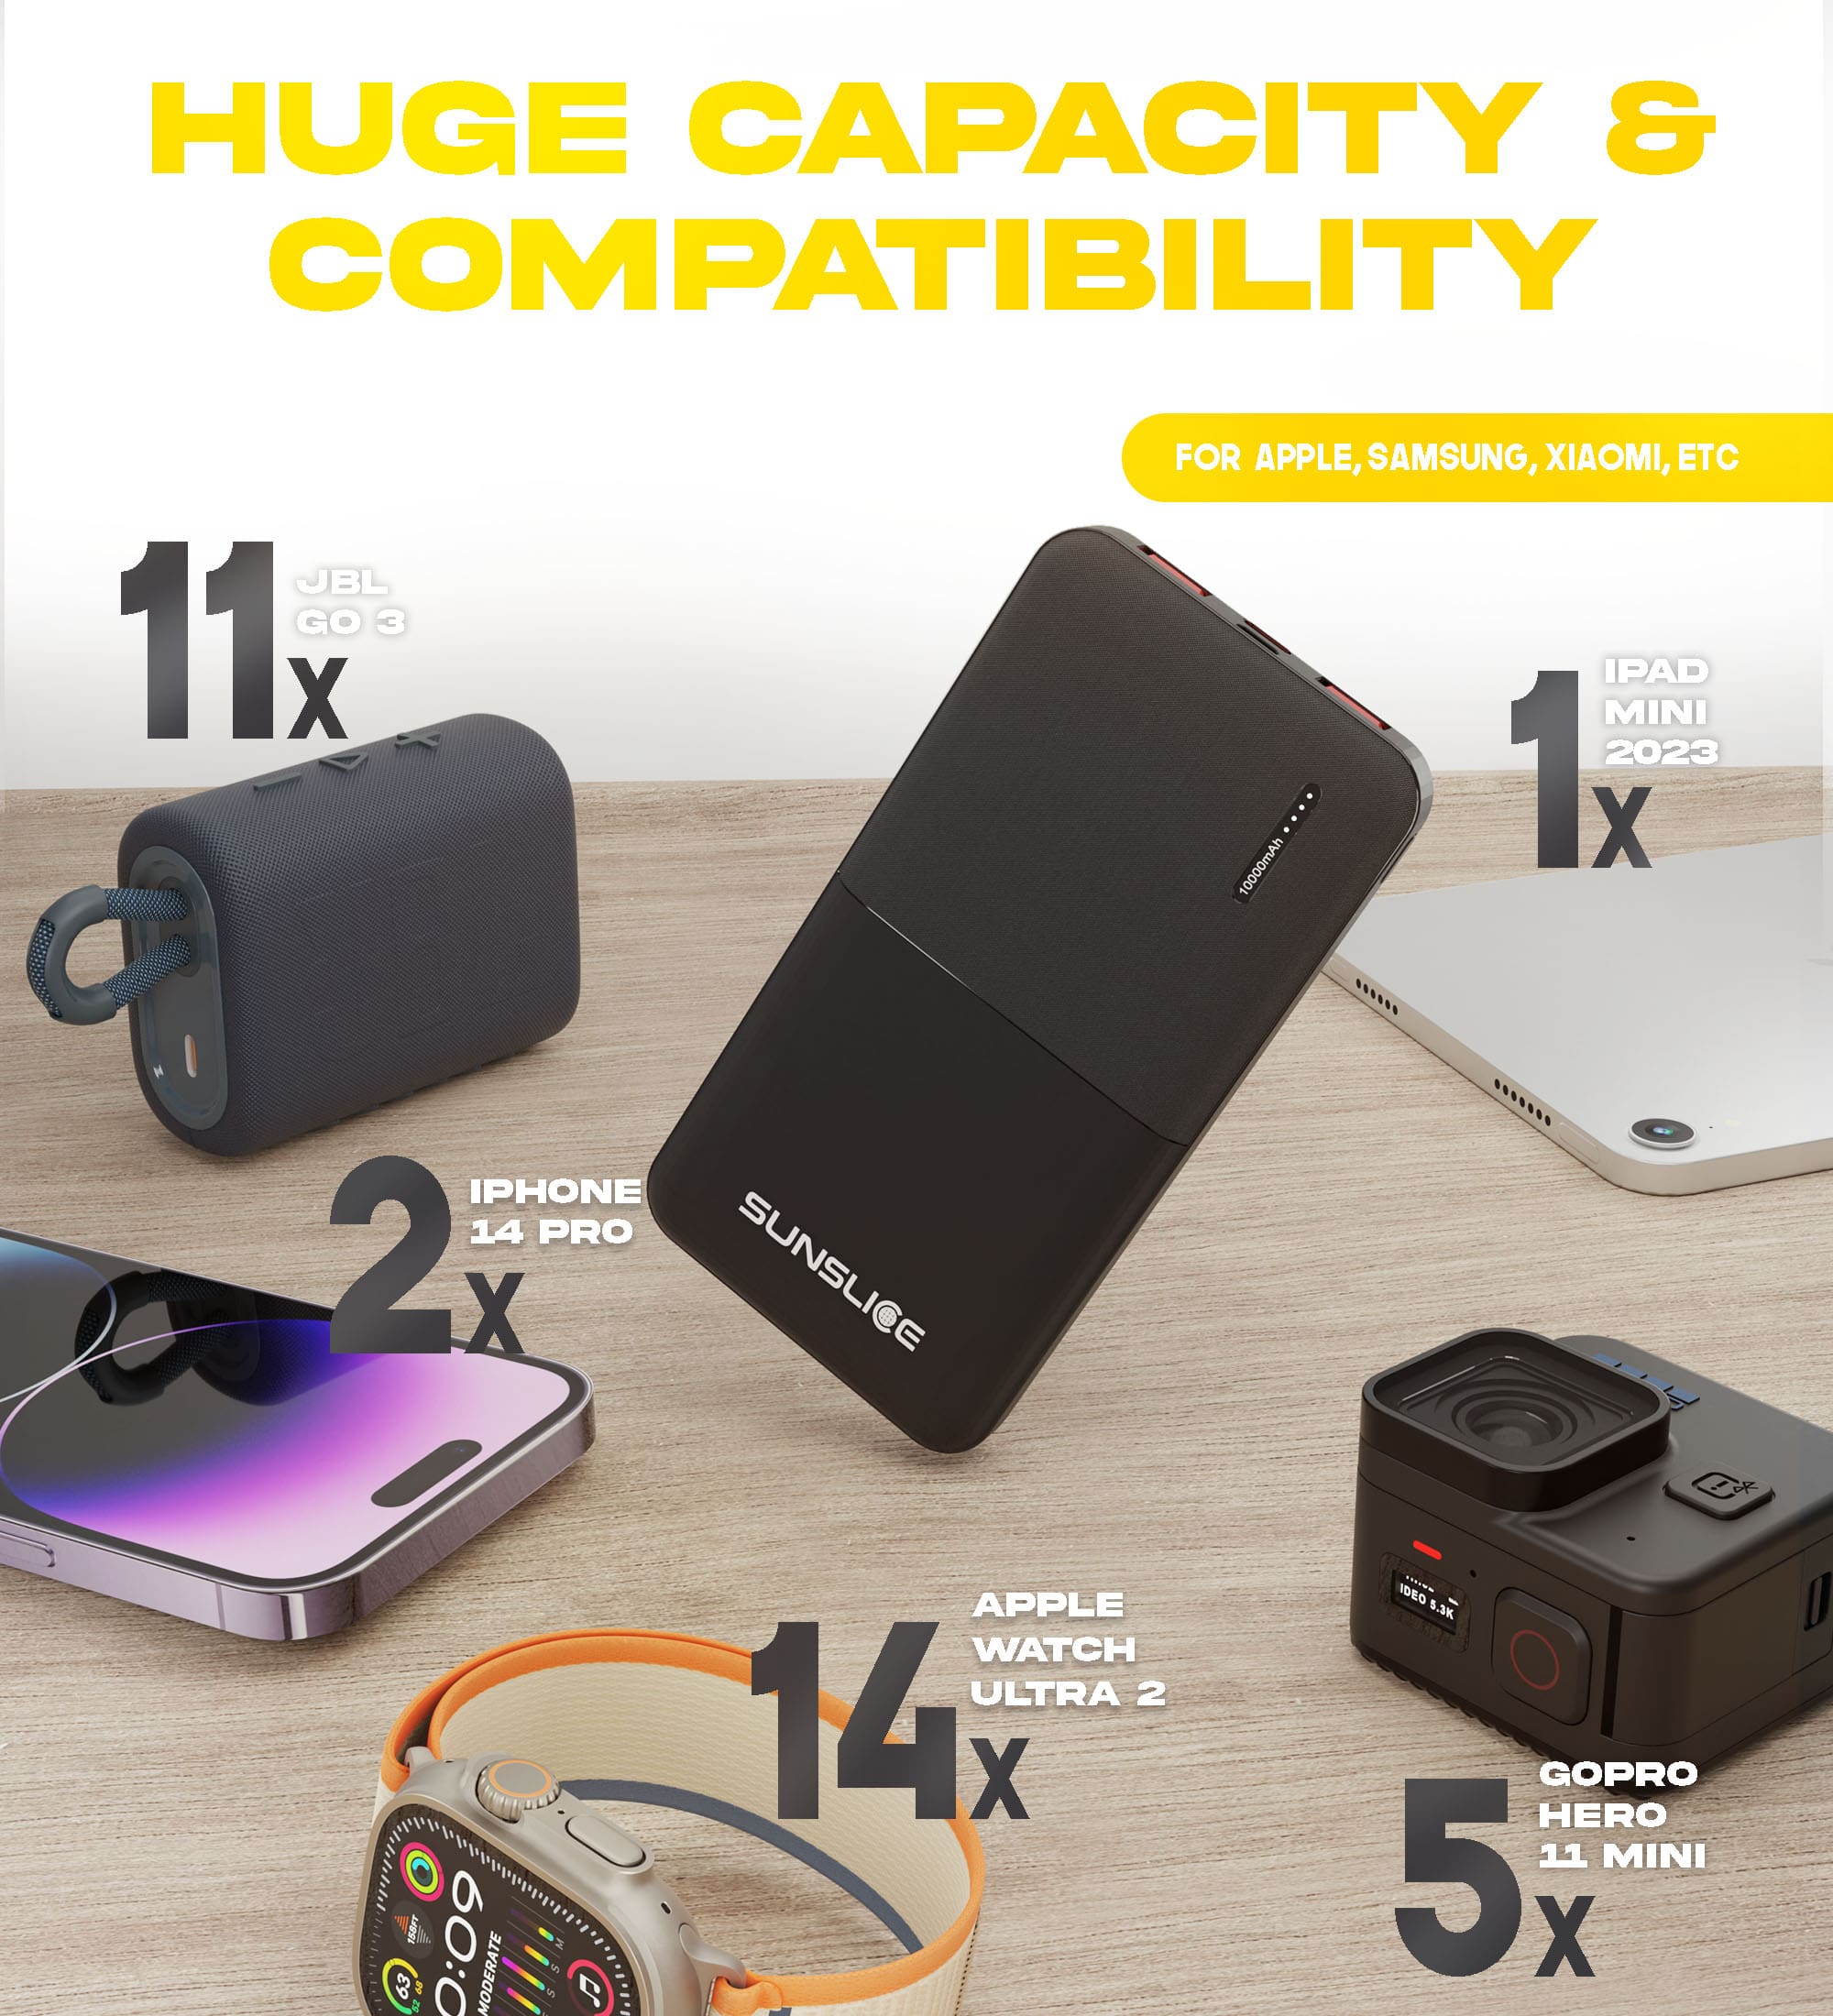 portable power bank in the middle of other devices to show it wide compatibility